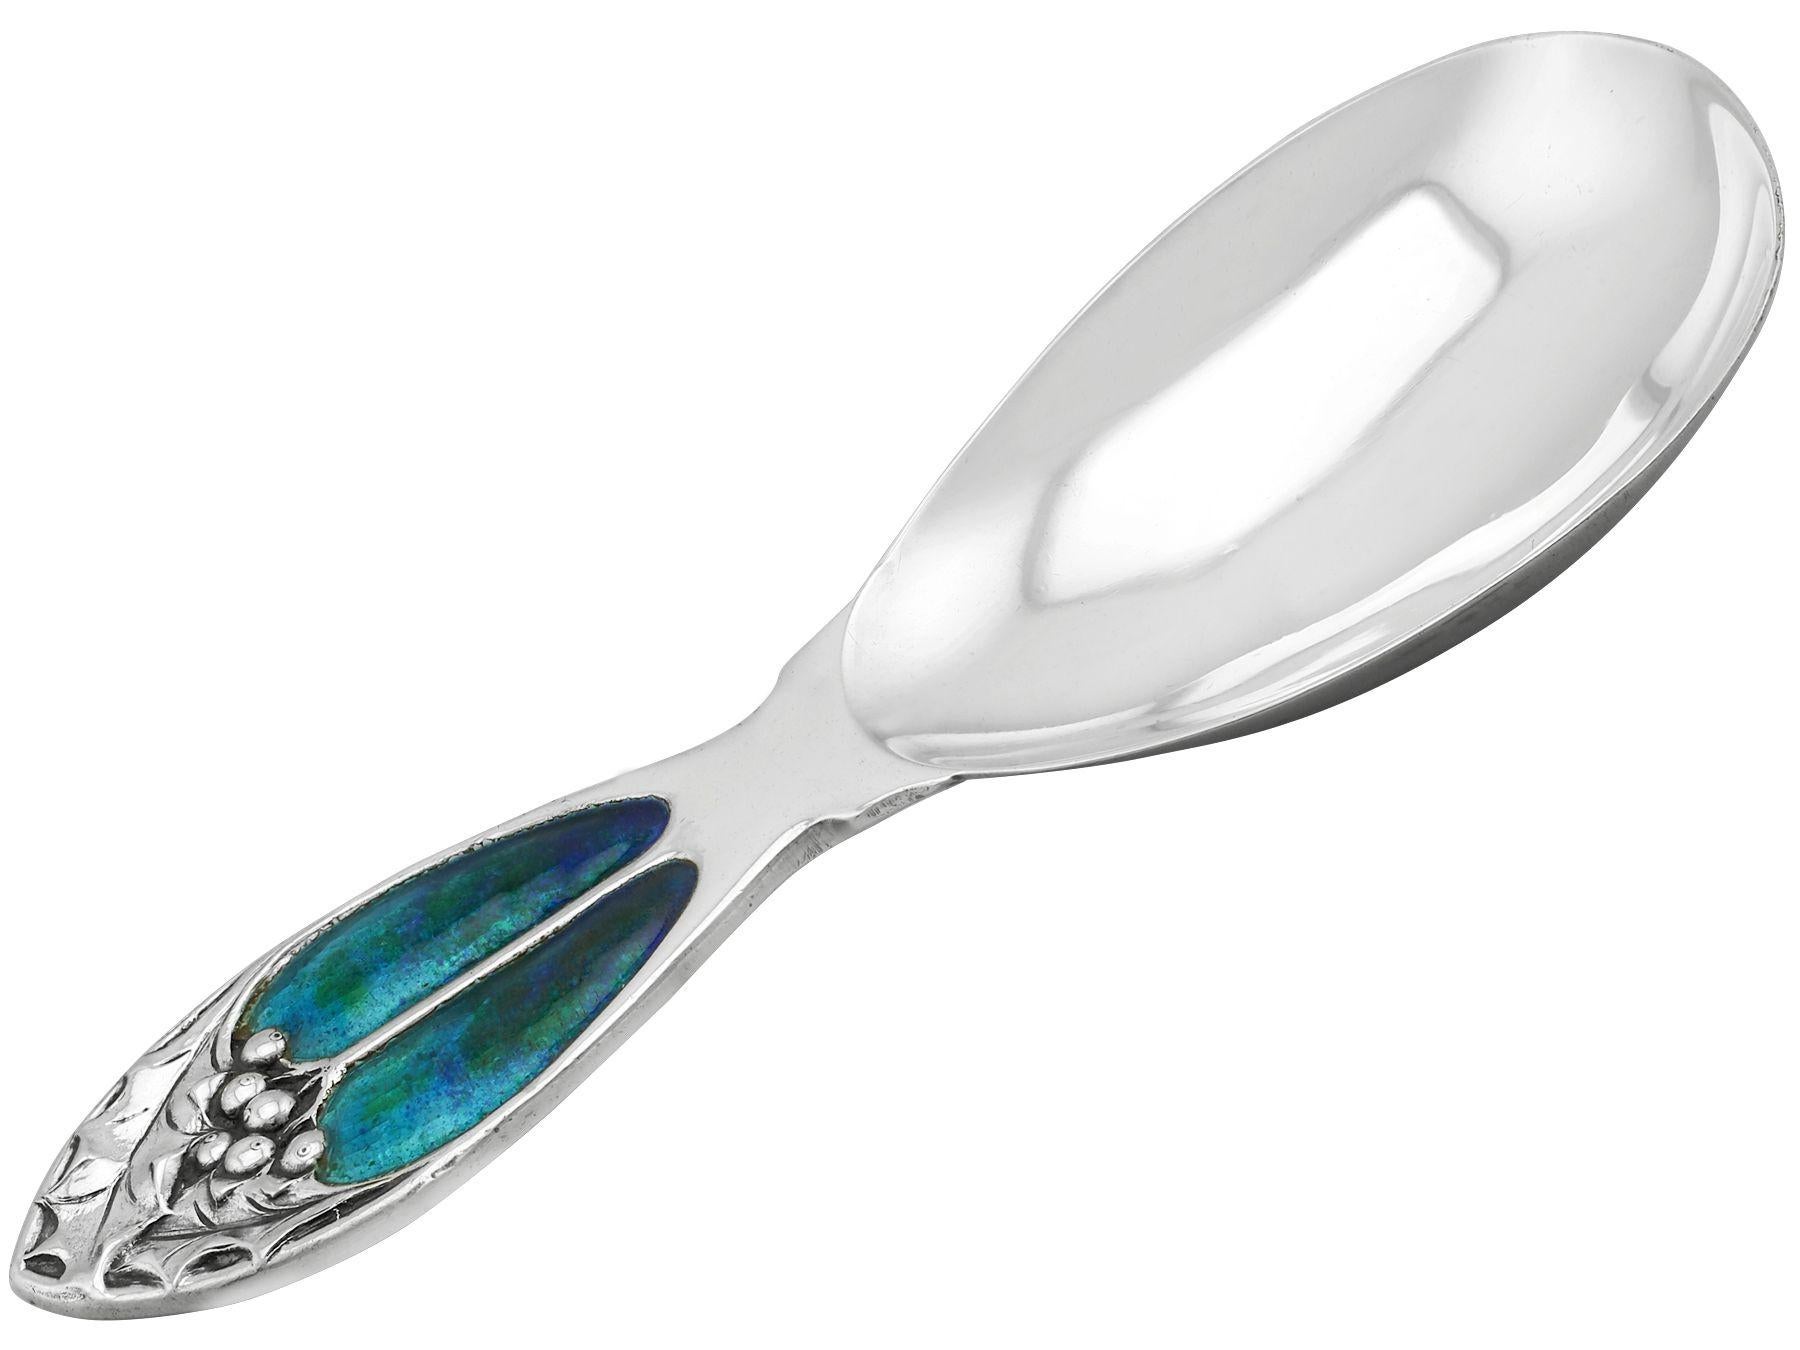 An exceptional, fine and impressive antique George V English sterling silver and enamel caddy spoon in the Art Nouveau style; an addition to our silver teaware collection.

This exceptional antique George V sterling silver caddy spoon has a plain